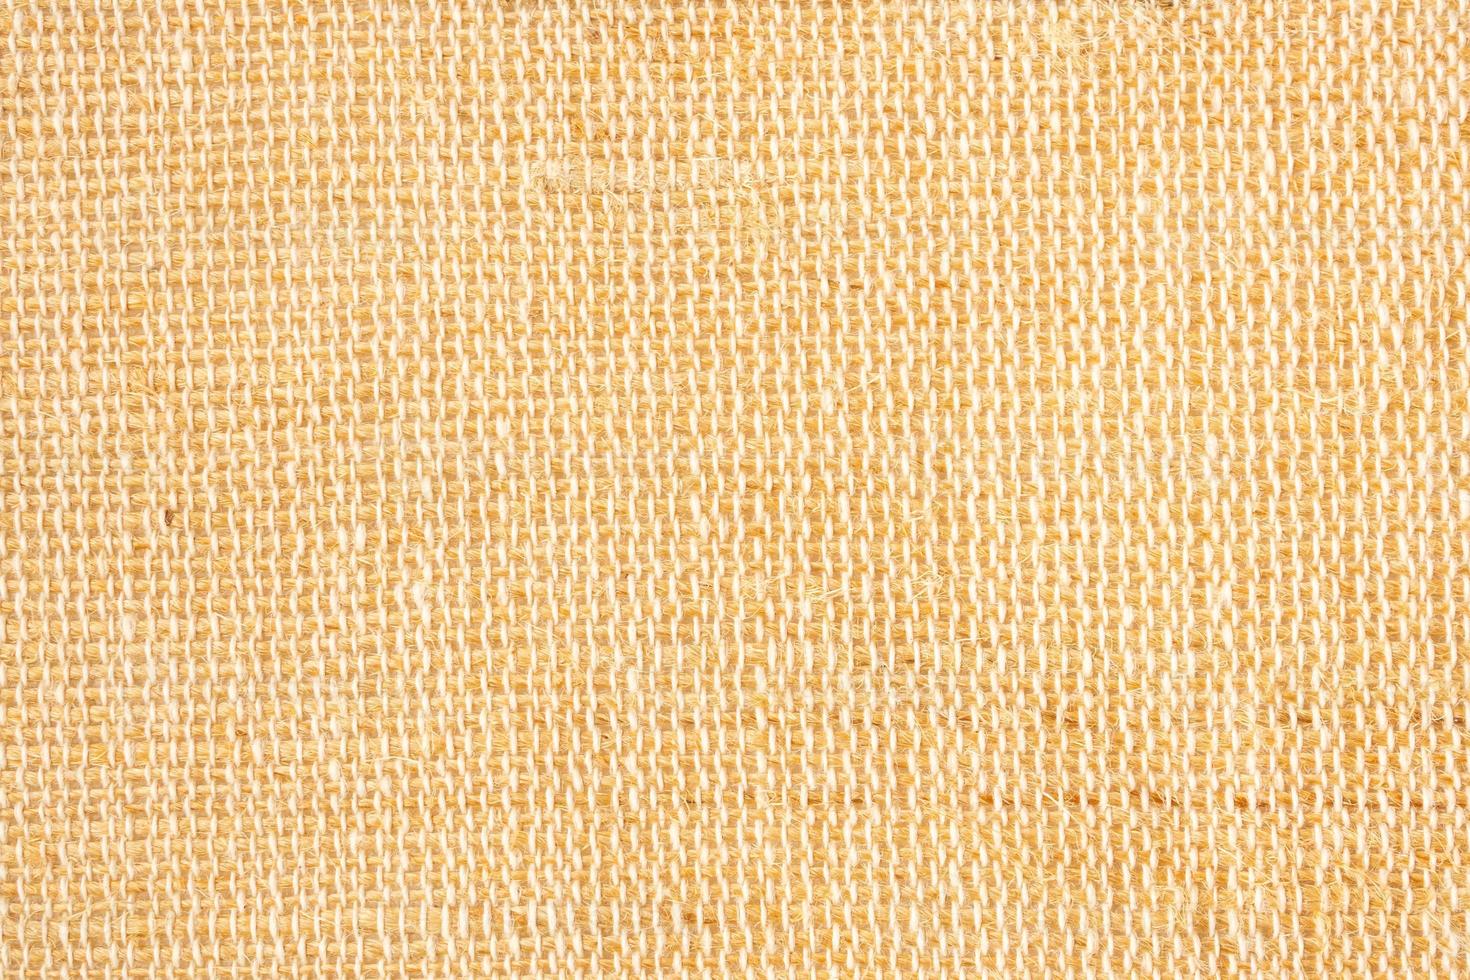 Texture Canvas Fabric As Background. High Resolution Photo. Stock